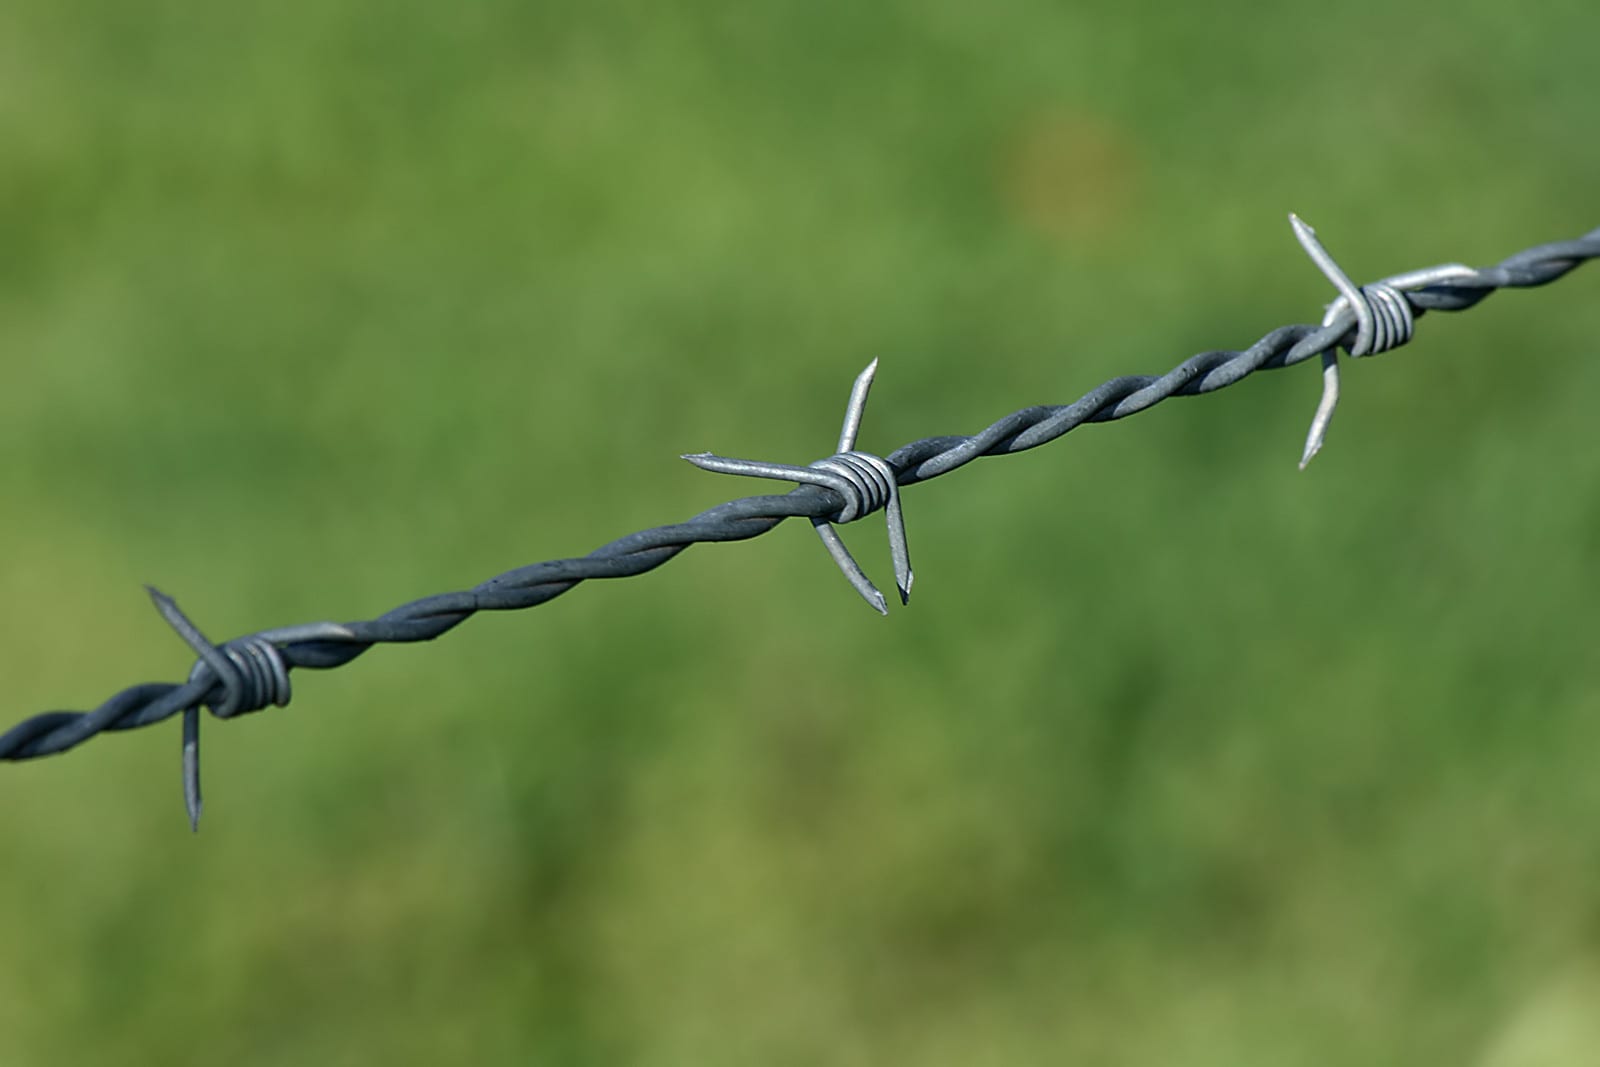 barbed wire6